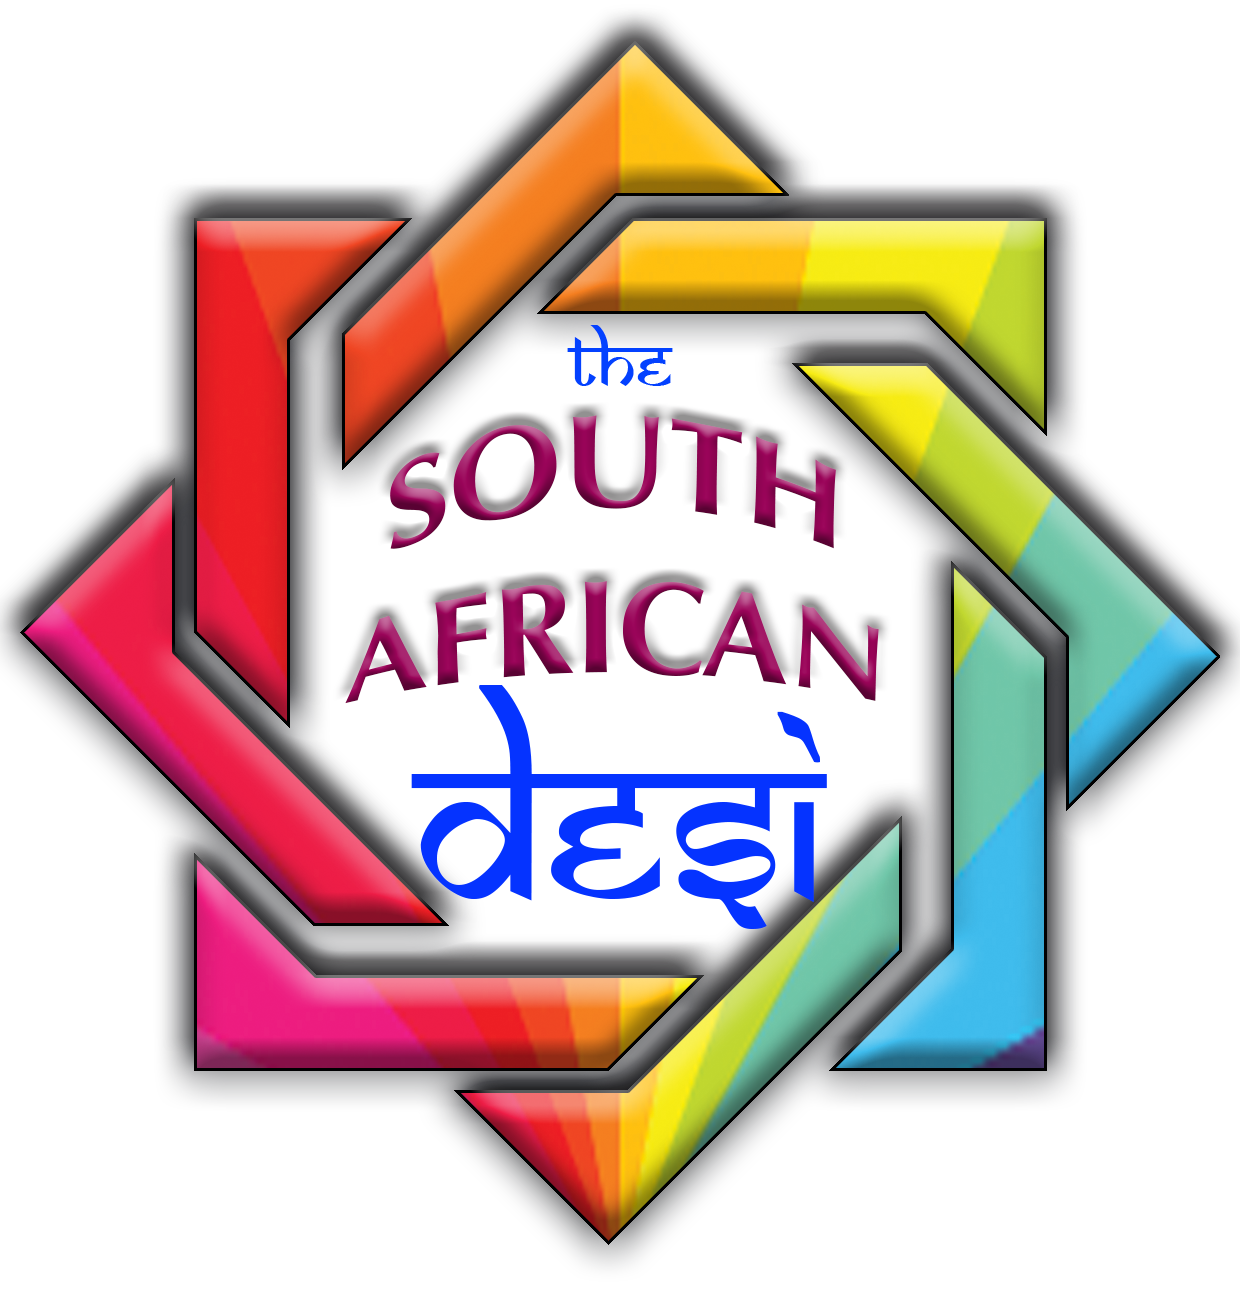 The South African Desi